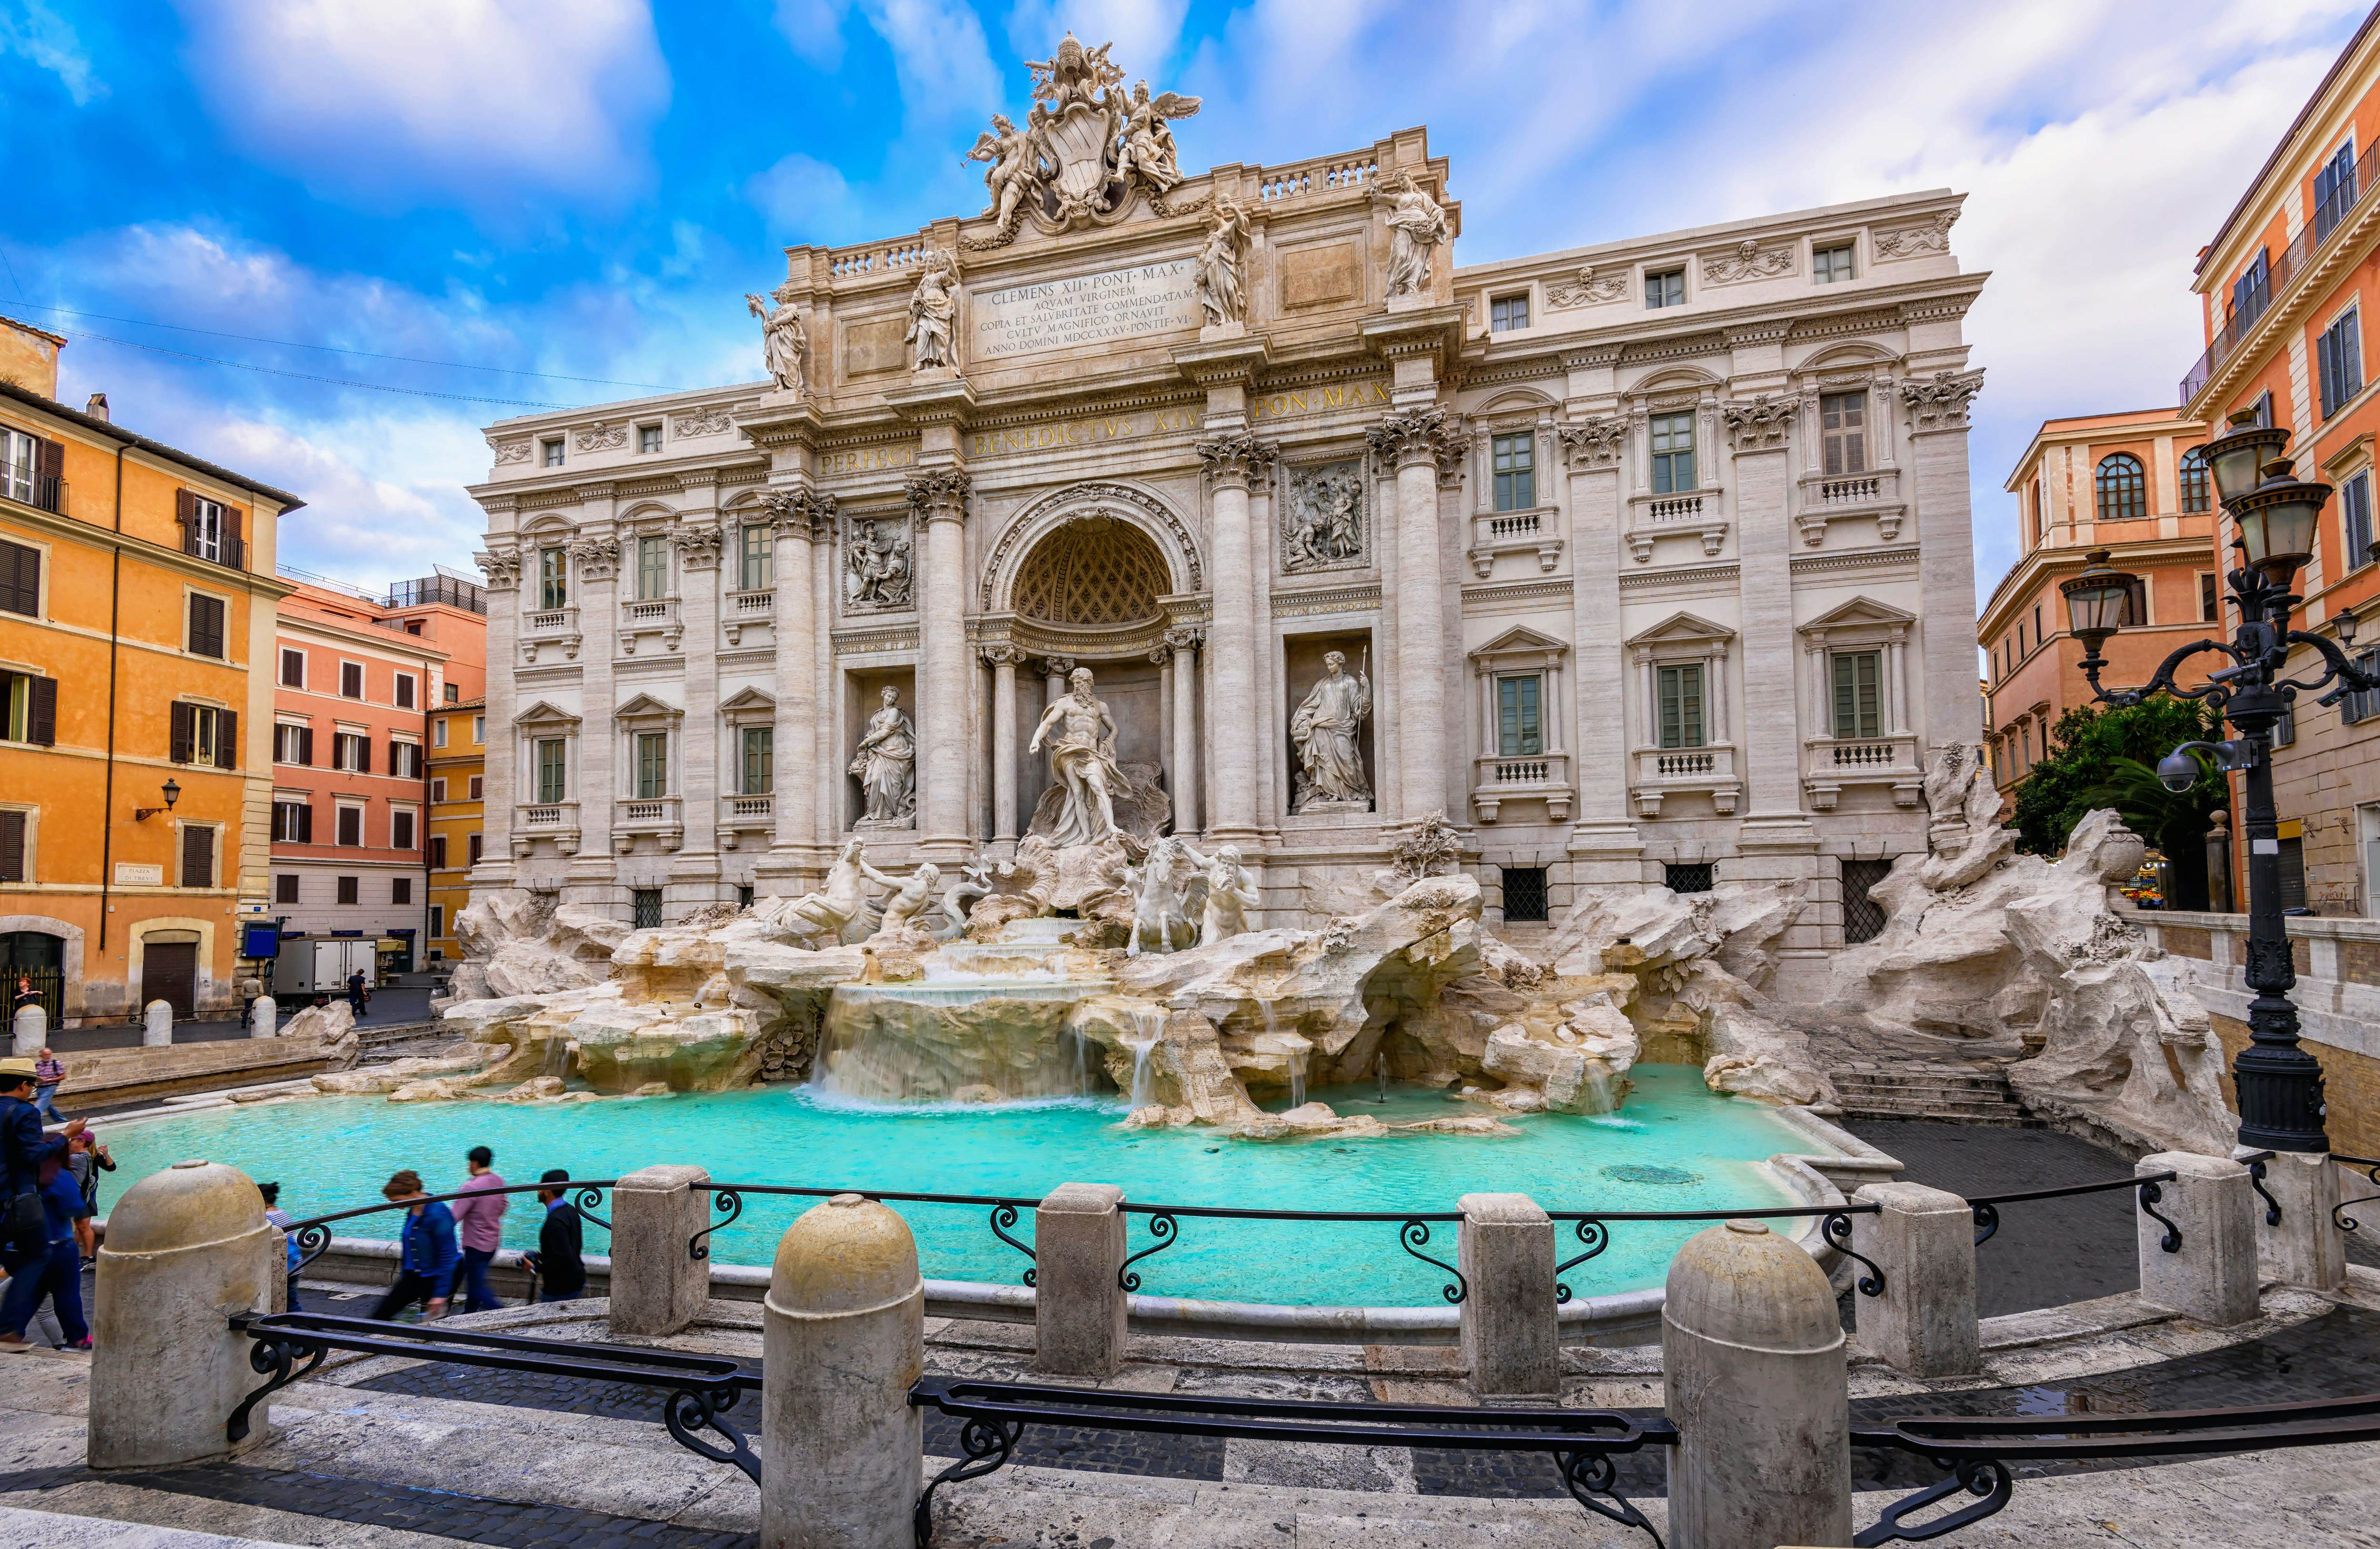 Rome moves forward with plans to protect the Trevi Fountain